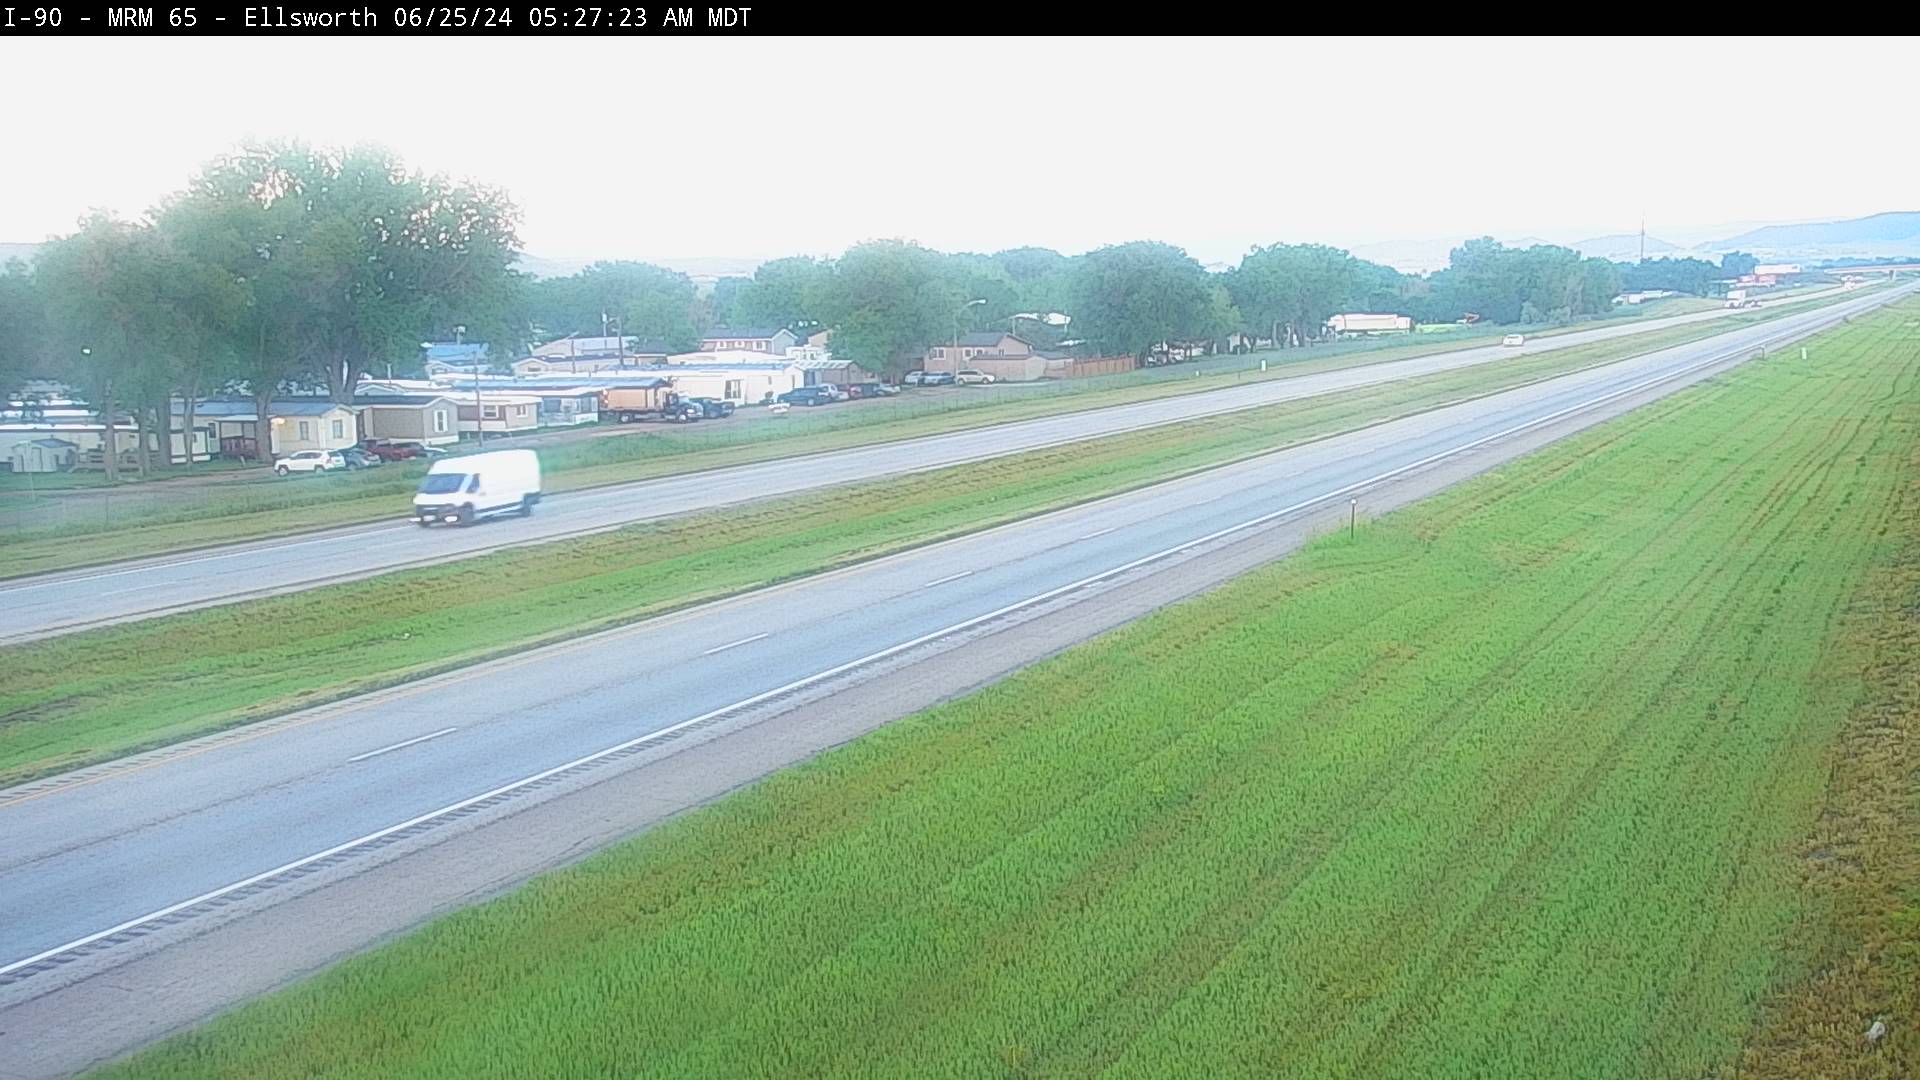 Traffic Cam 4 miles east of town along I-90 @ MP 65.2 - South Player